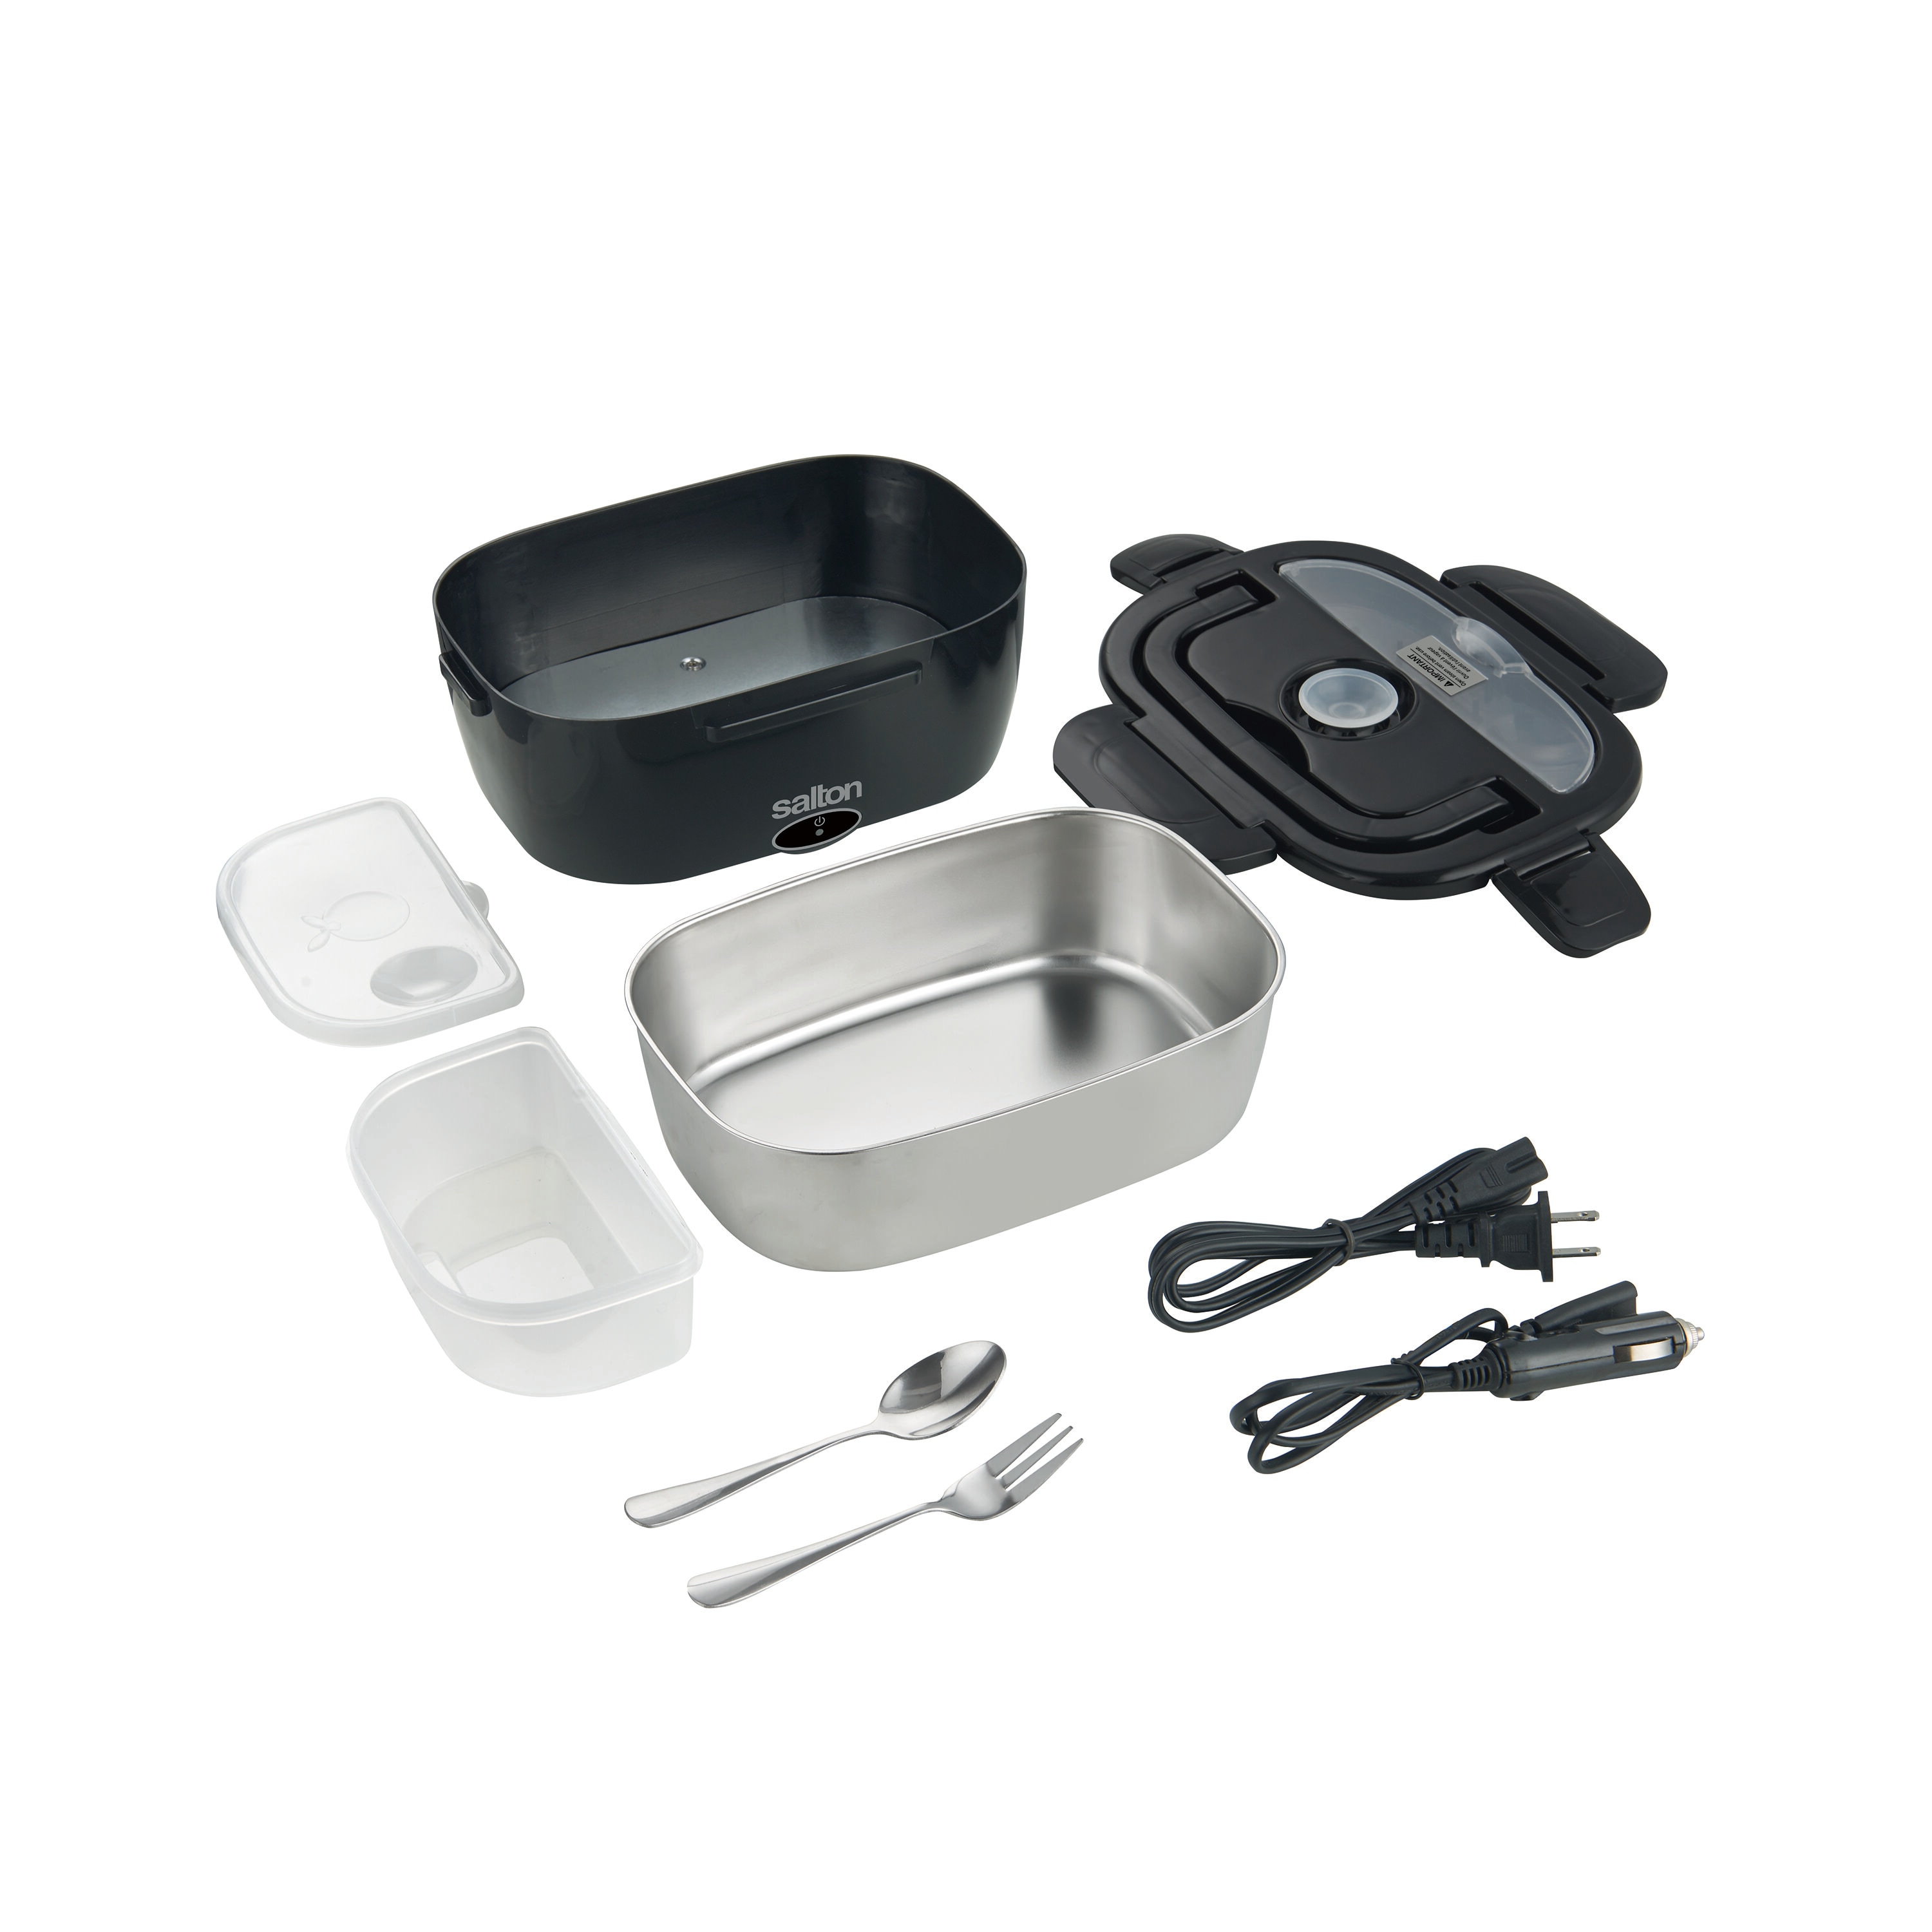 Salton Black 1.58 Insulated Self-heating Lunch Box in the Portable